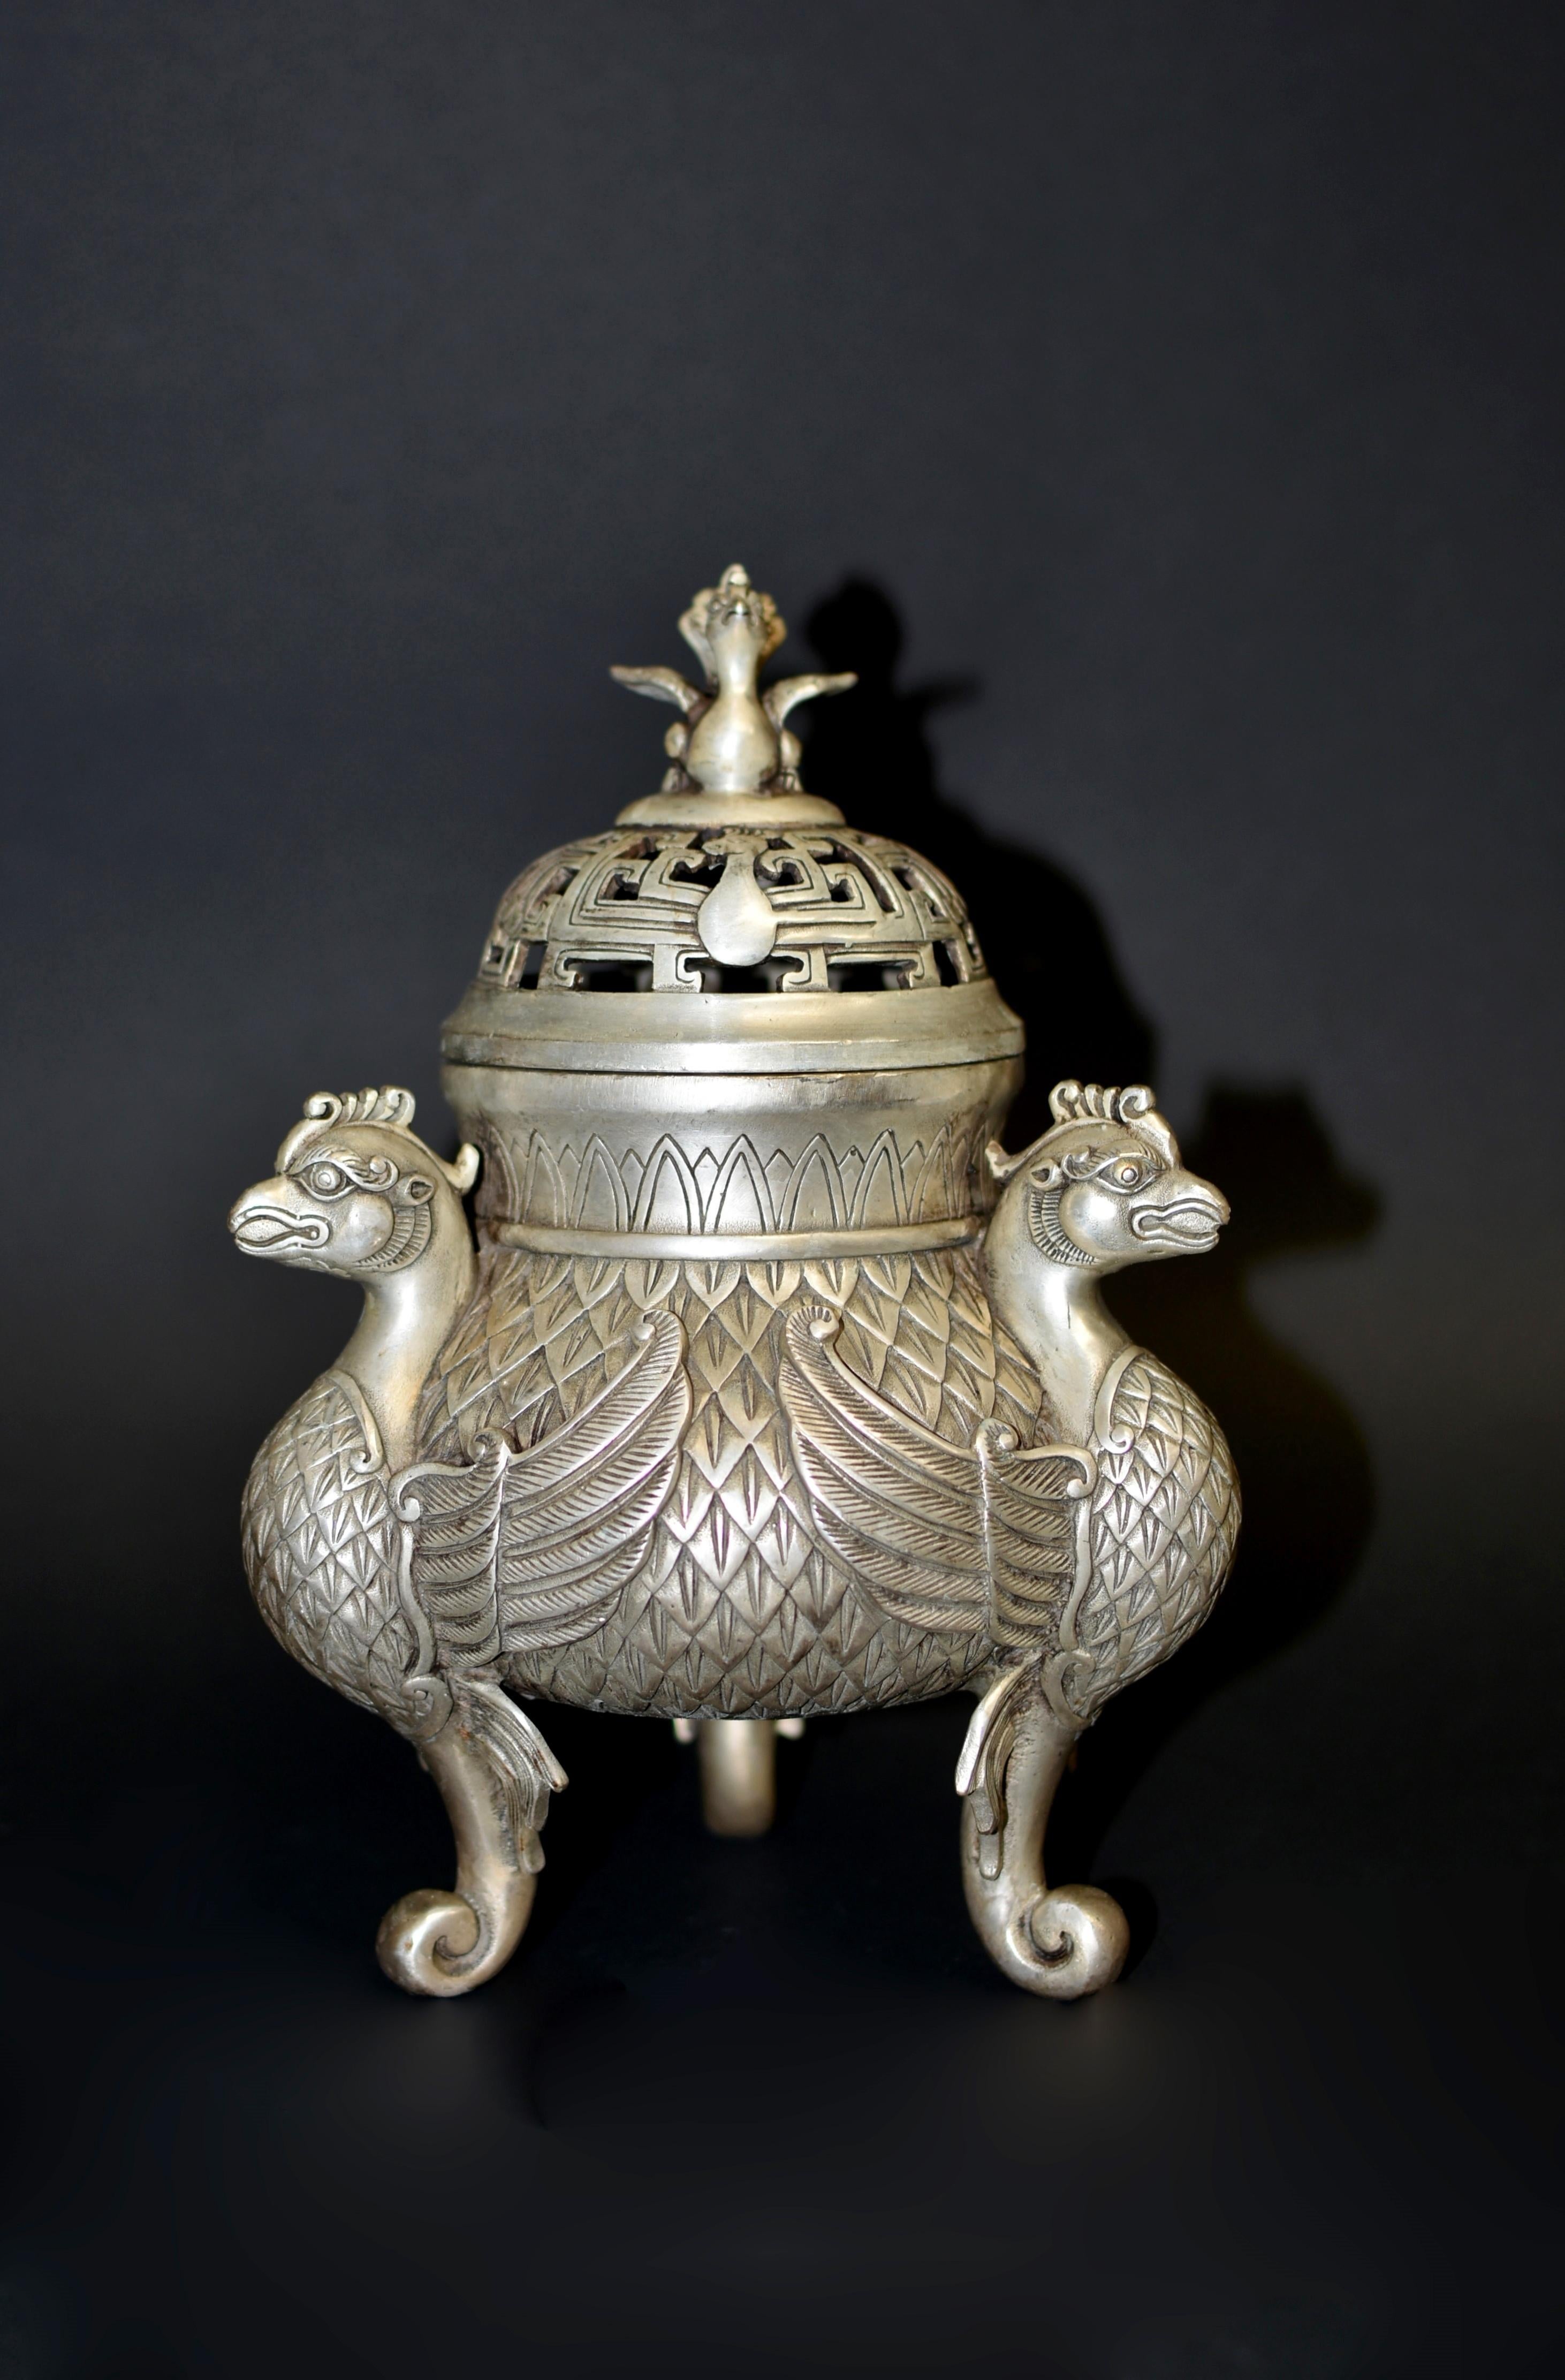 A beautiful 4-lb silver bronze tripod censer. The vessel is decorated to the bulbous sides with three regal pheasants set against a textured feather background, below a large cover pierced with an eternity design, topped by a young newborn pheasant.